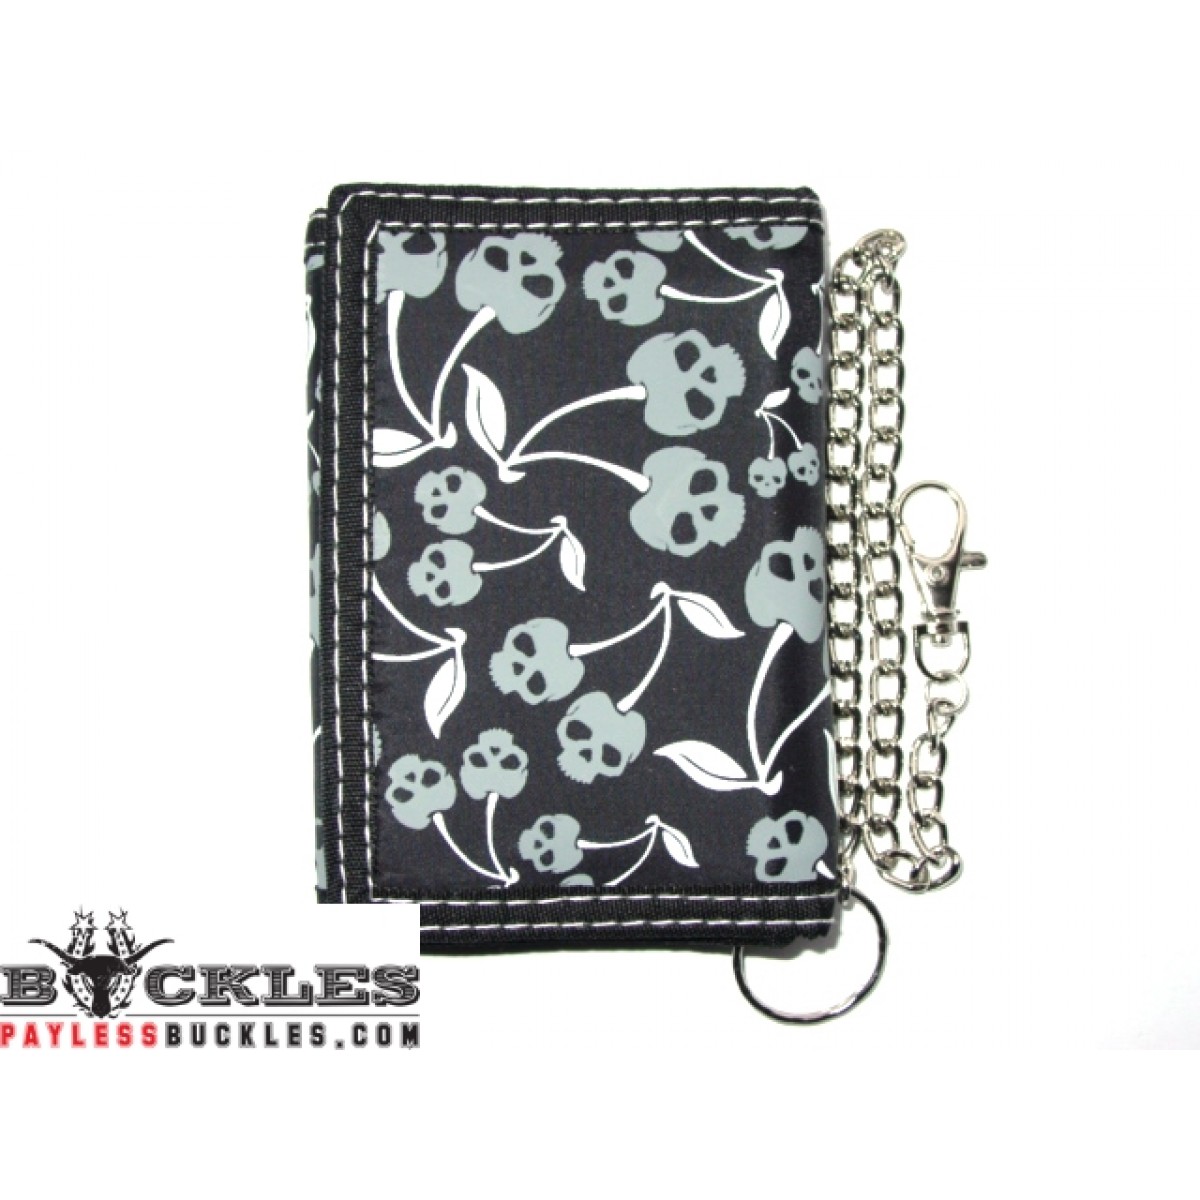 Wholesale Skull Chain Wallets - Choose from Best Hot Items, Lowest Prices - PaylessBuckles